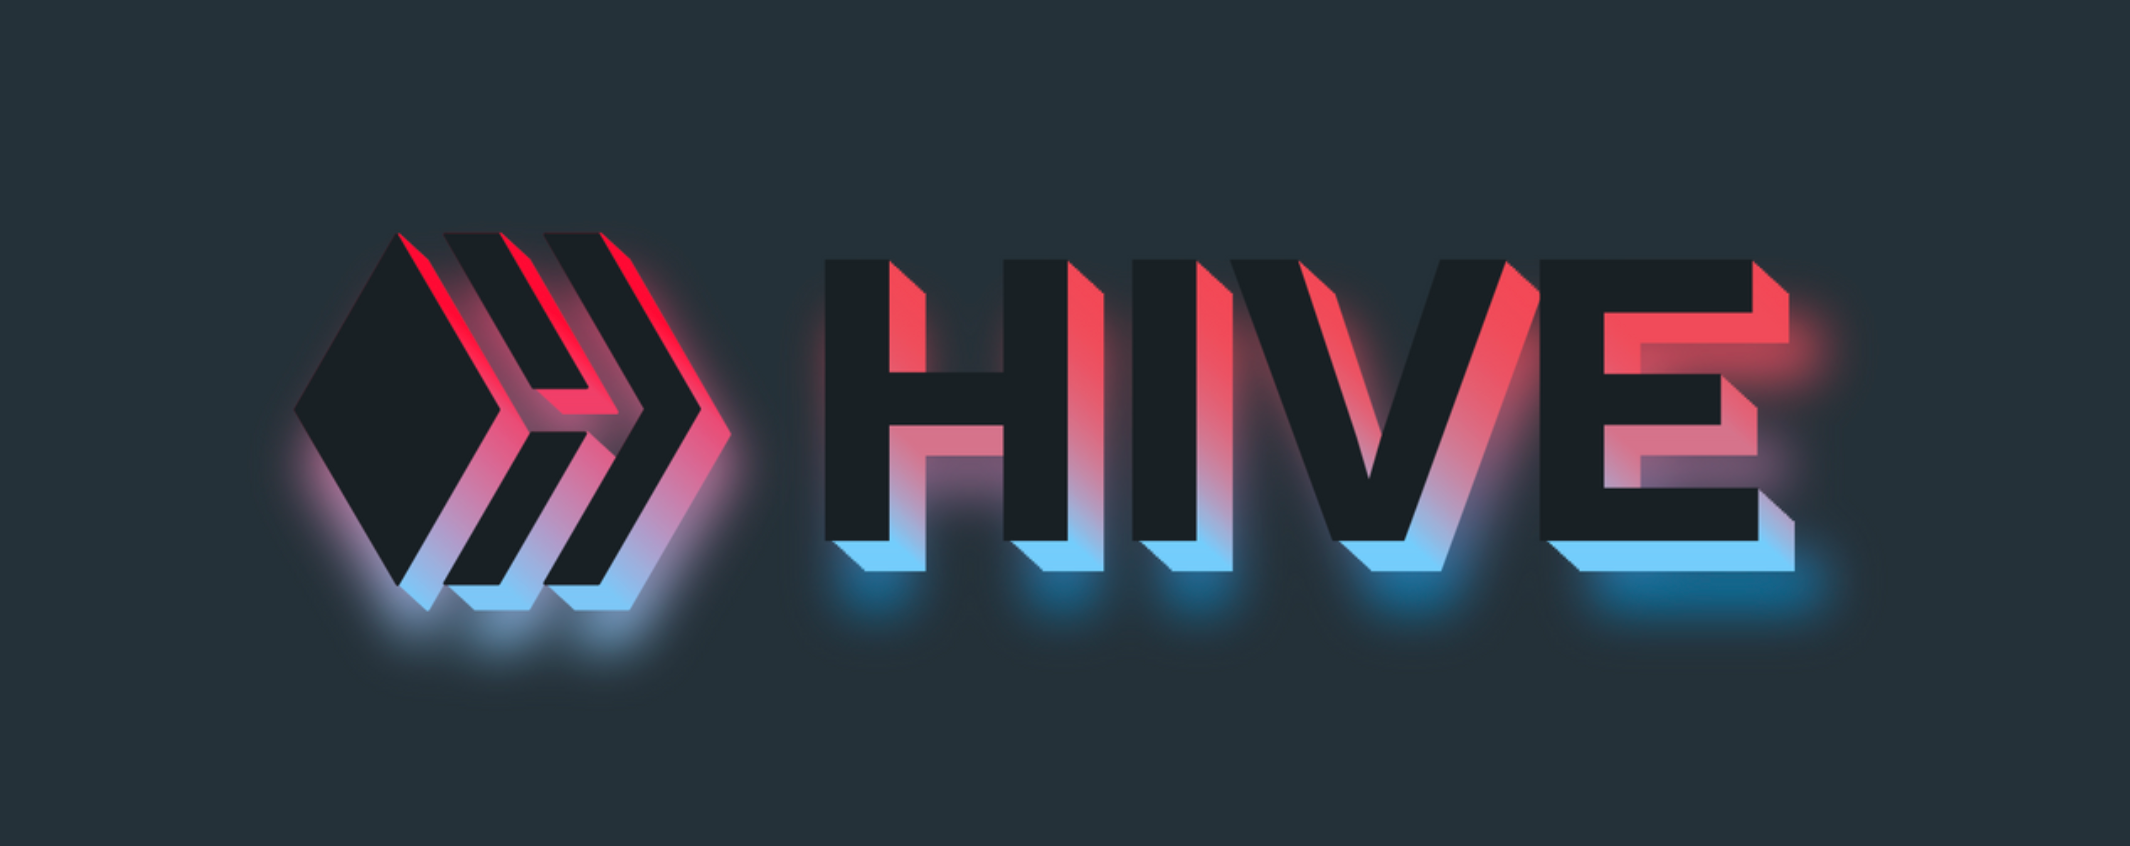 A banner image to encourage those switching from Twitter, to try Hive instead.